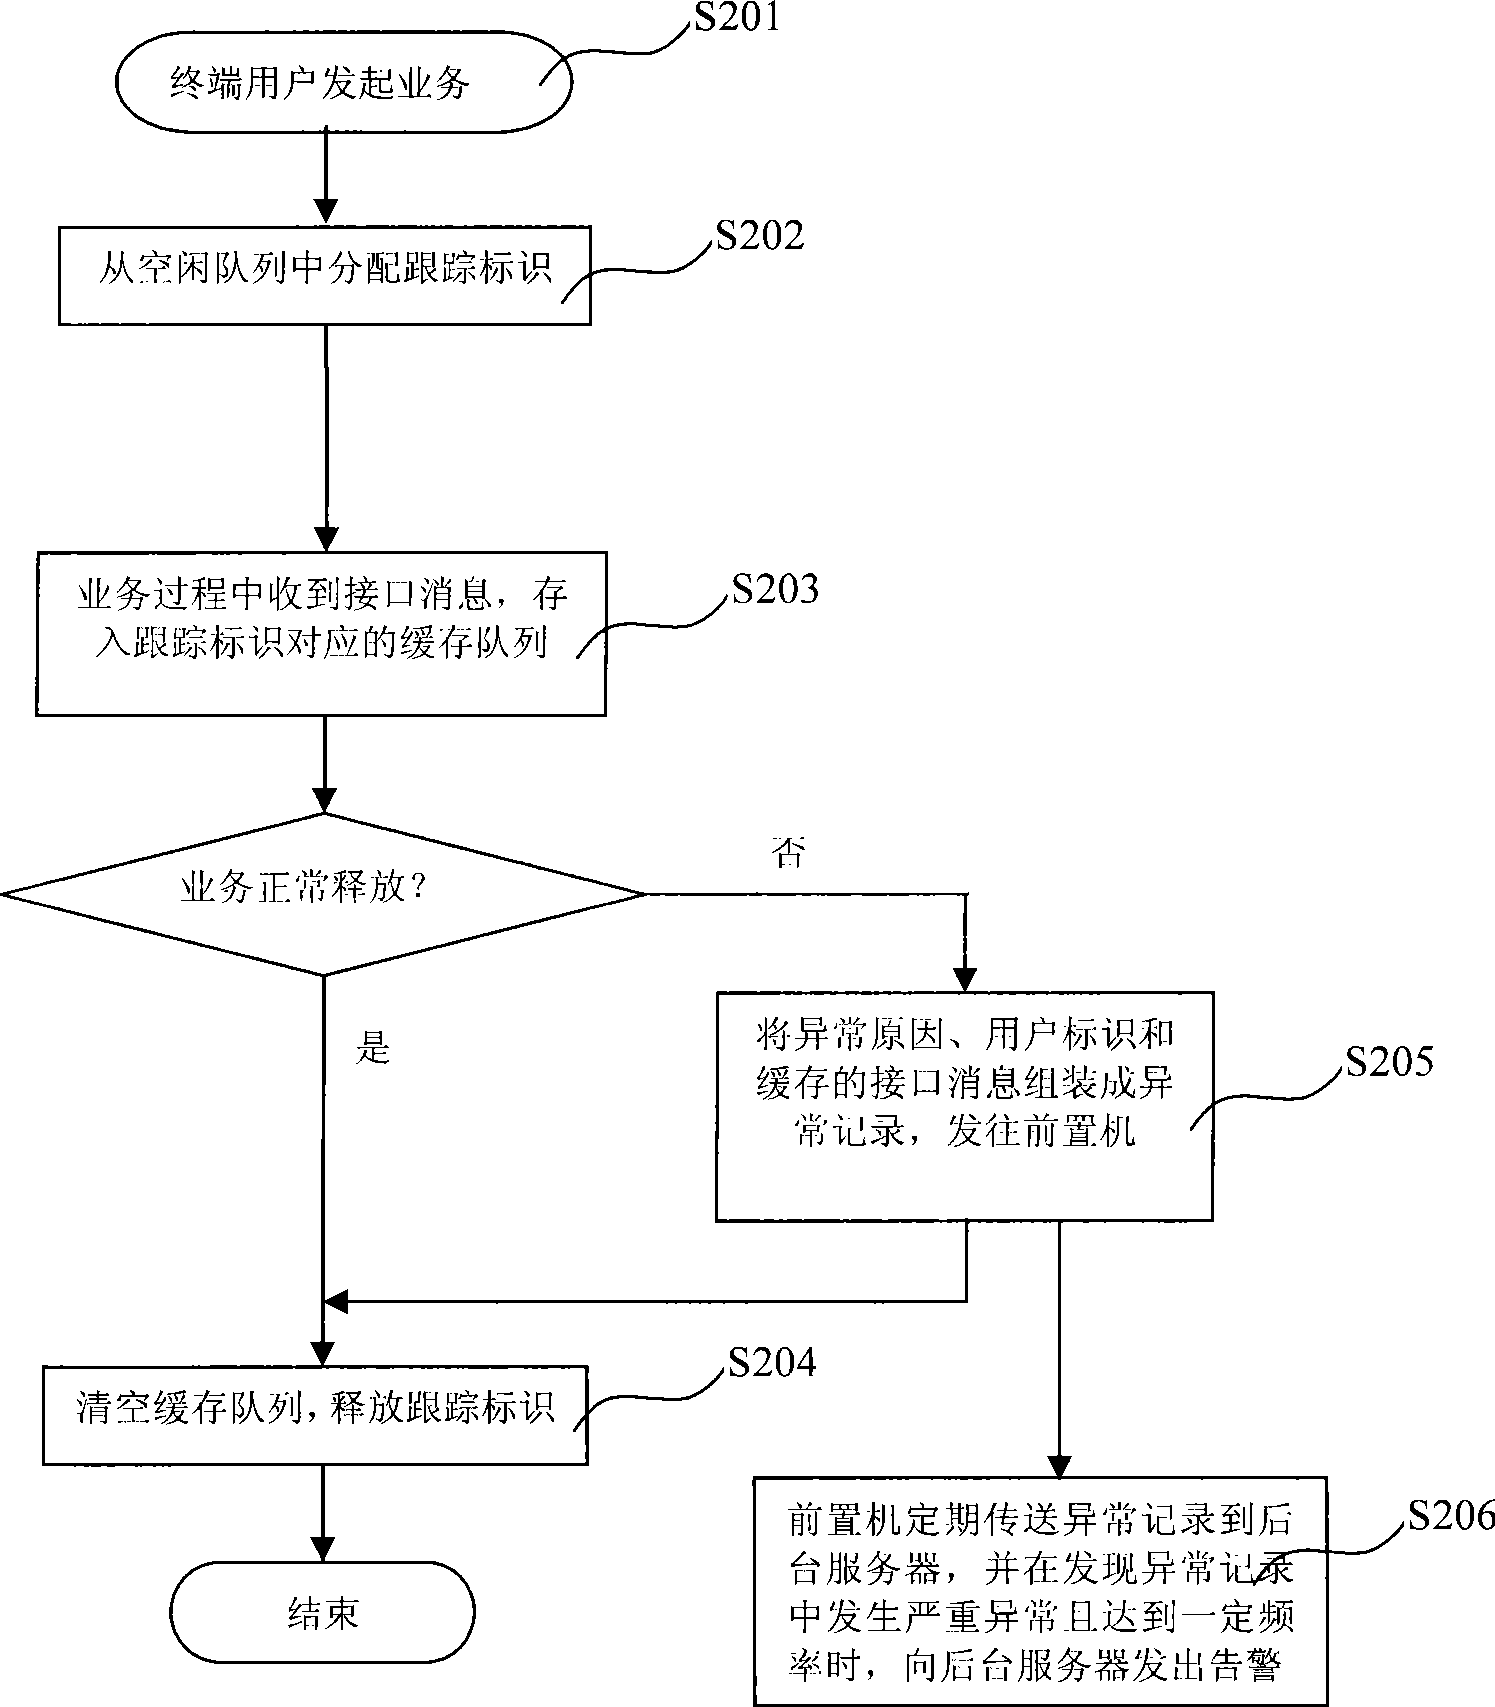 Method, apparatus and system for GSM system service tracking and exception management